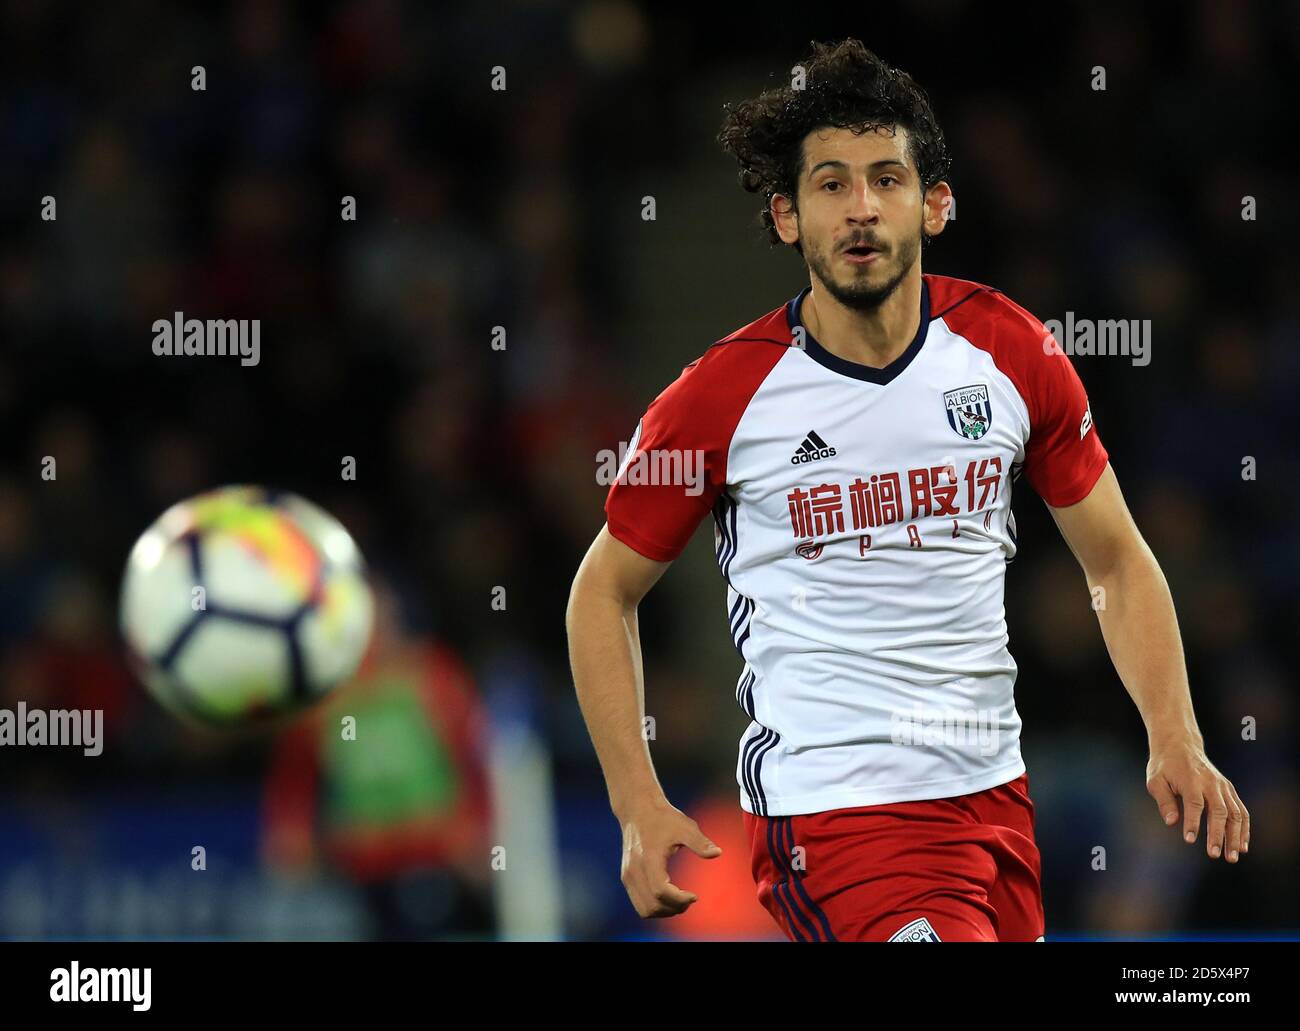 West Bromwich Albion's Ahmed Hegazy Stock Photo